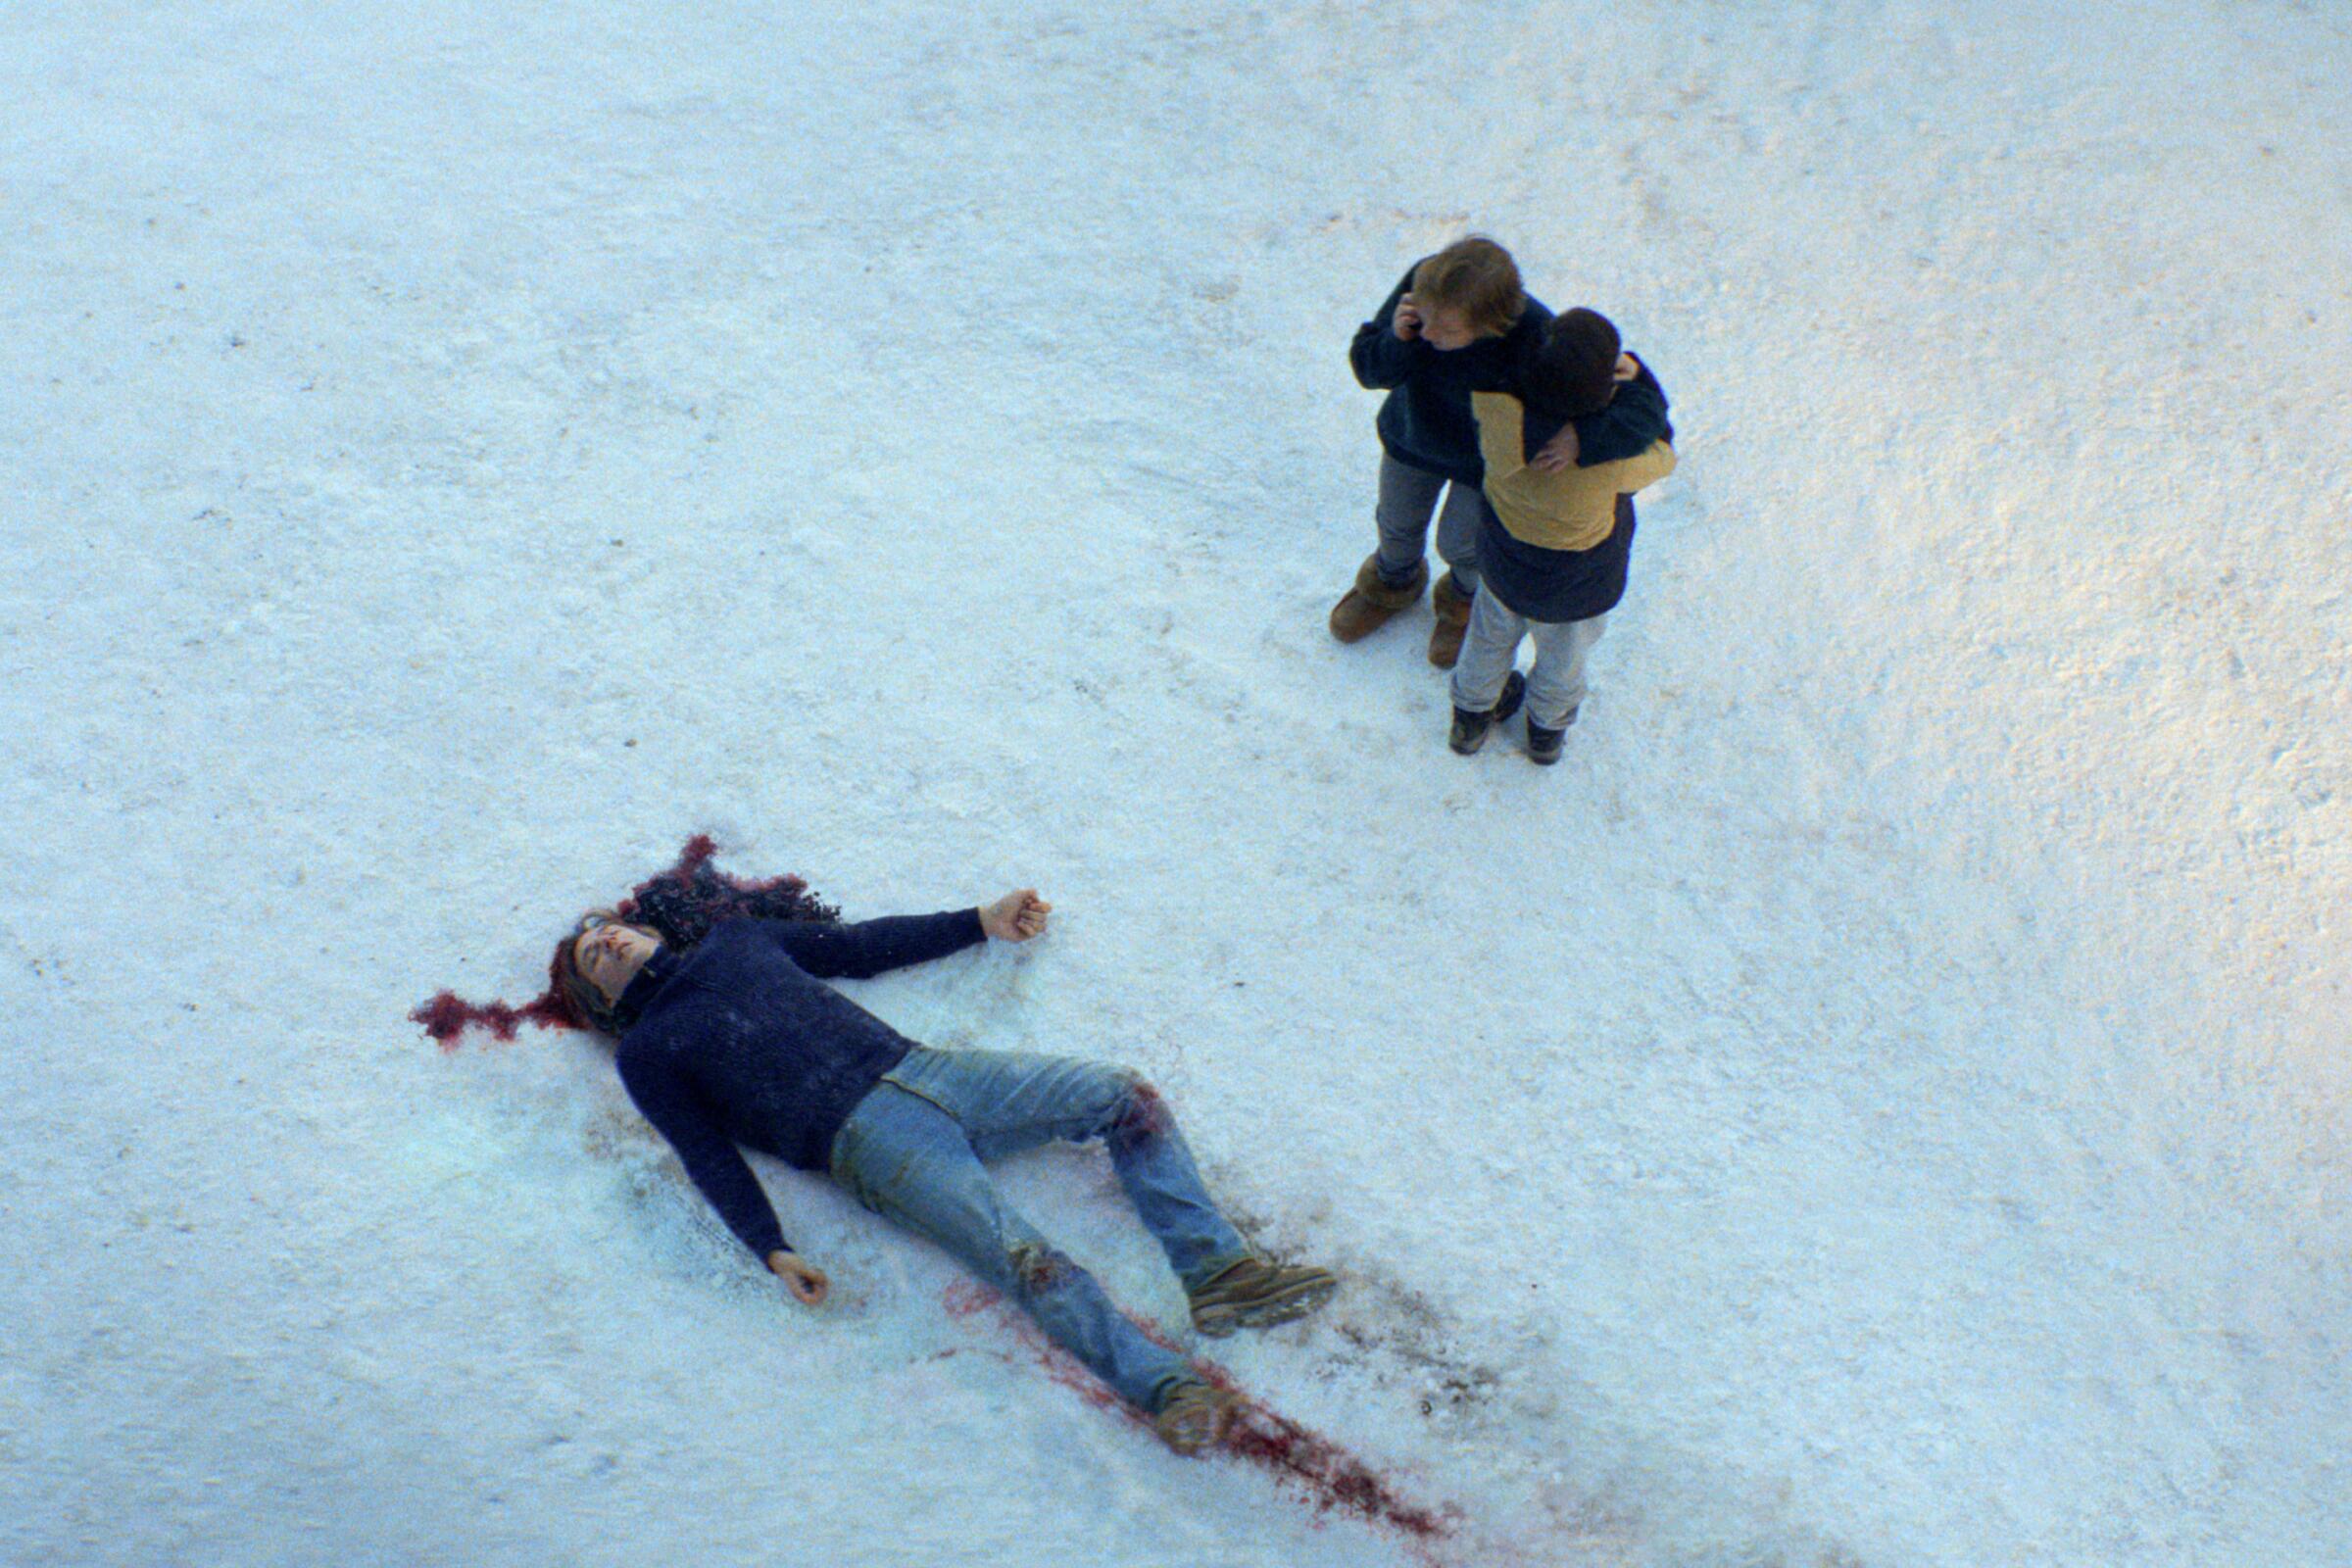 Two people stand over a body bleeding in the snow in "Anatomy of a Fall."